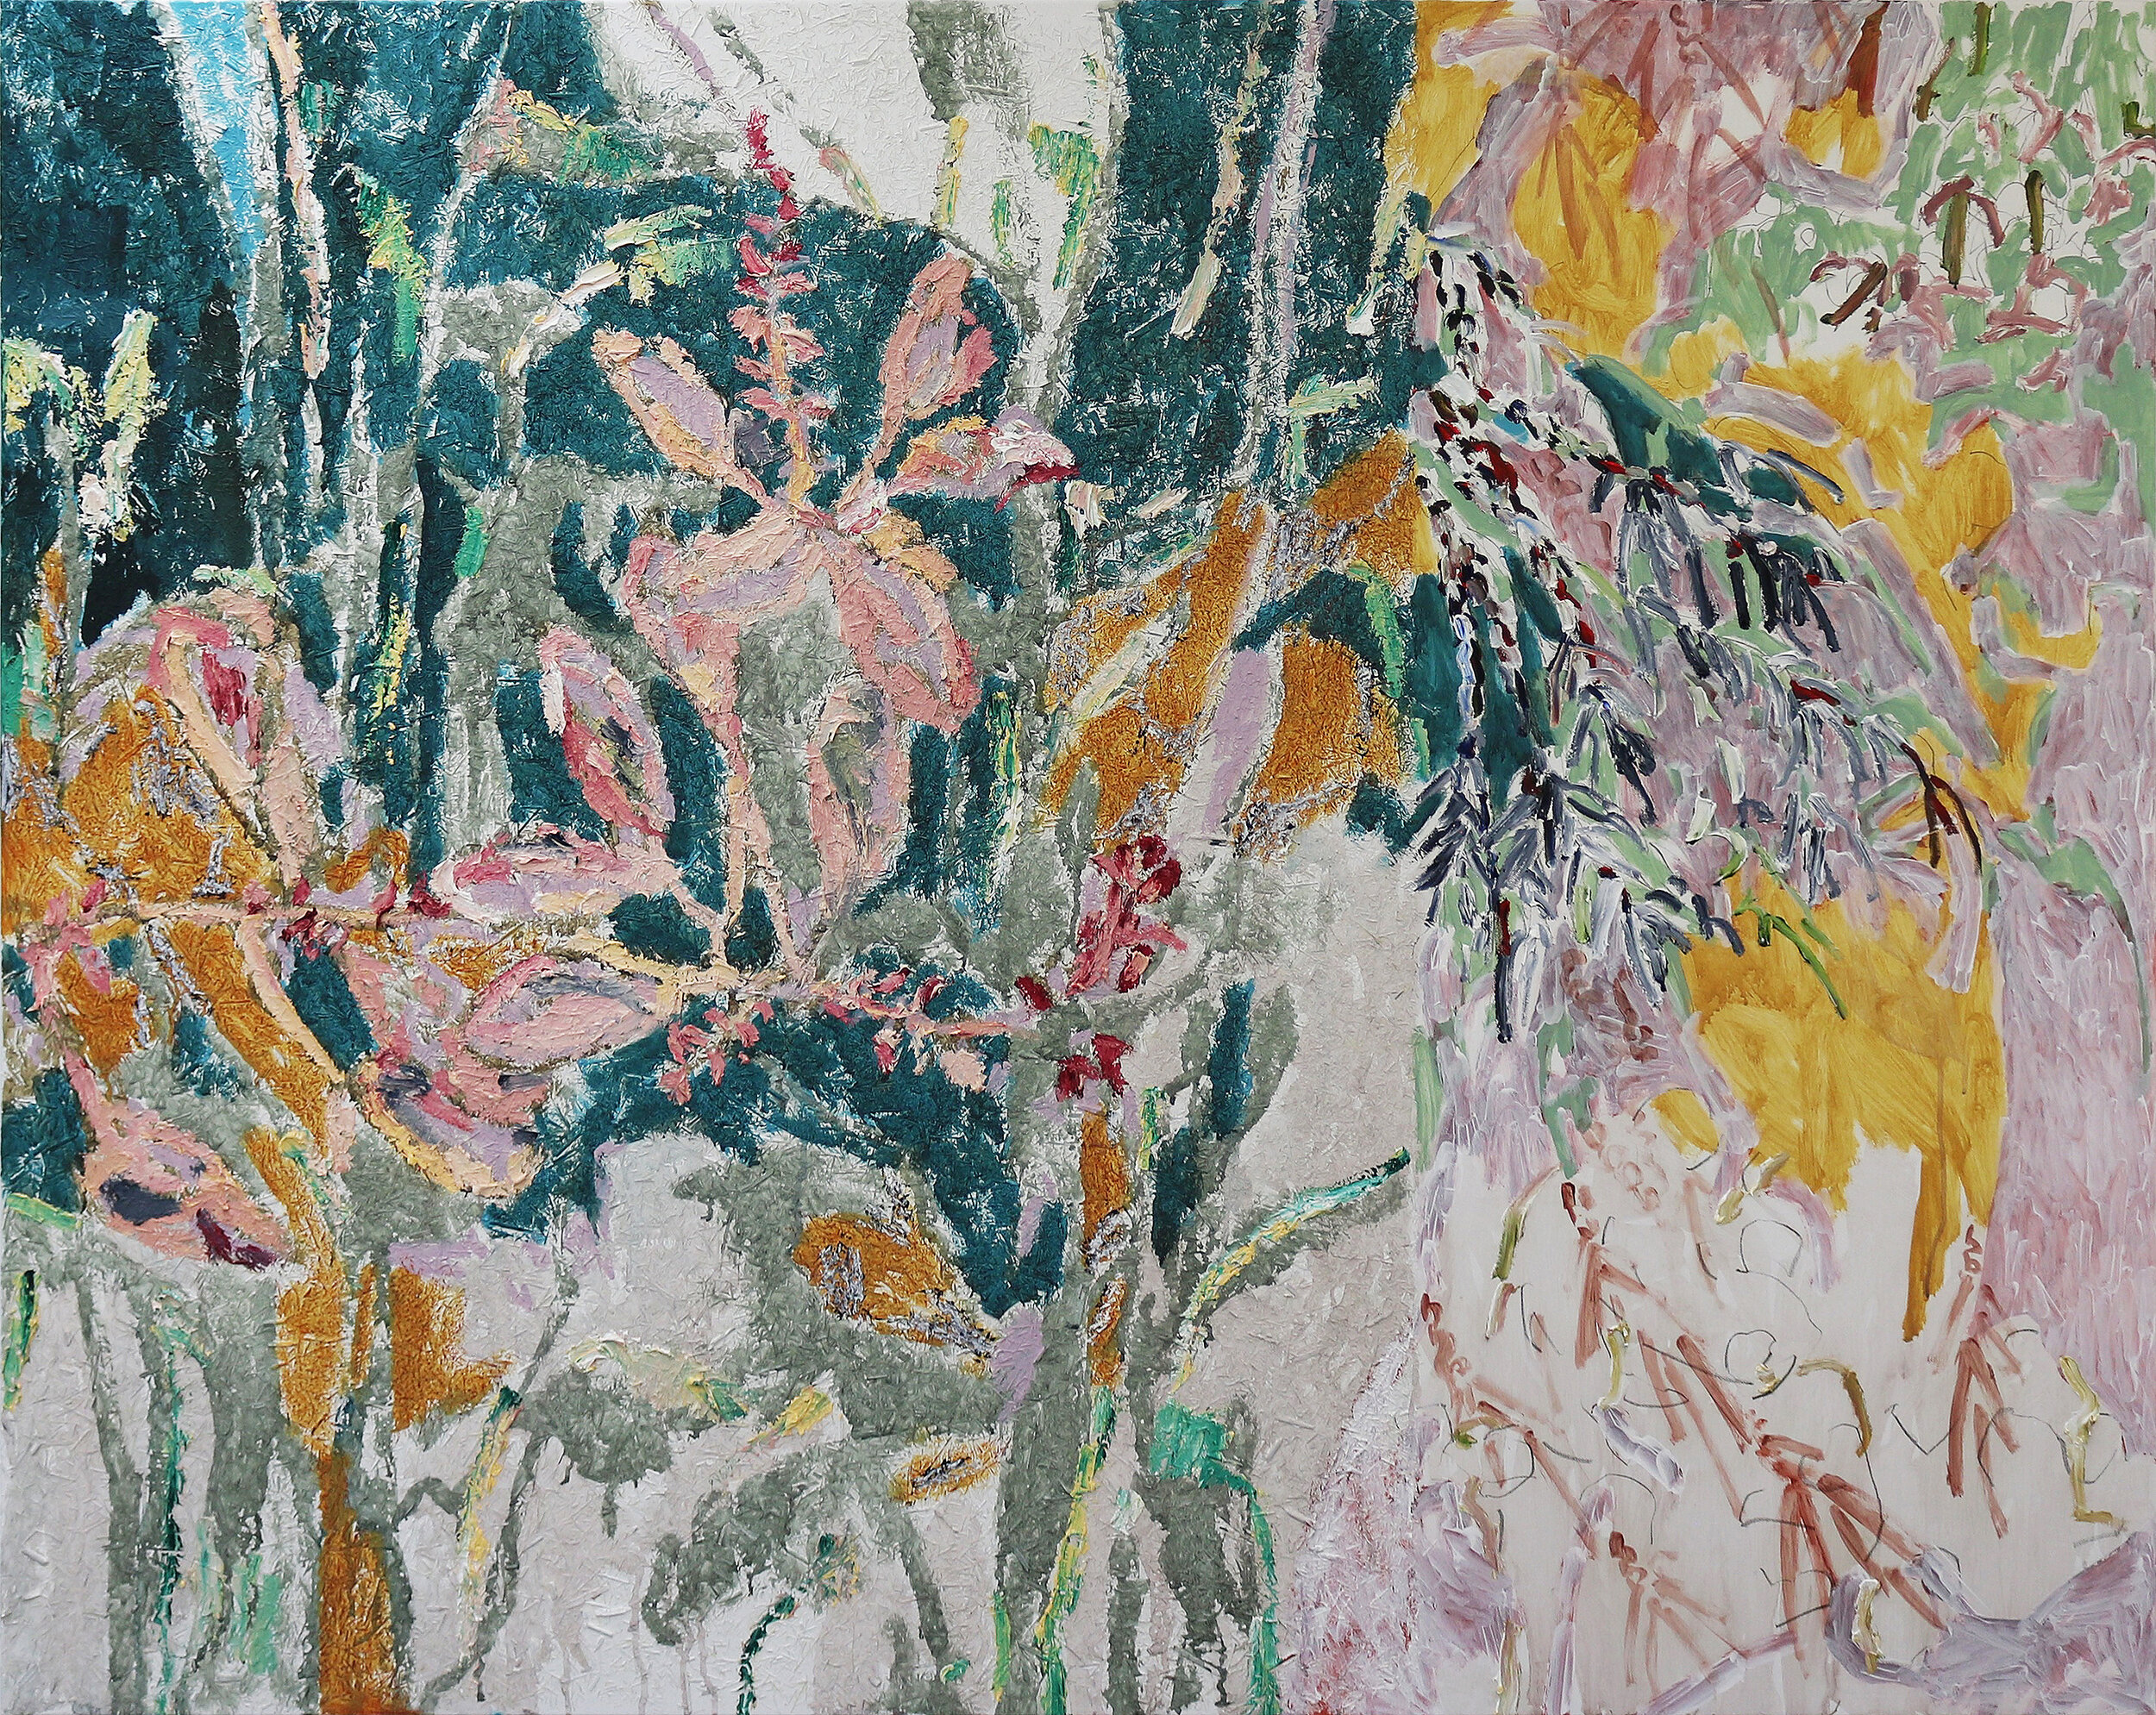   ORCHIDS AND PLANTS UNKNOWN  Acrylic, oil, graphite, prismacolour pencil and straw on cotton canvas. Unframed. 122cm x 152cm x 4cm. Enquire at  Curatorial and Co  